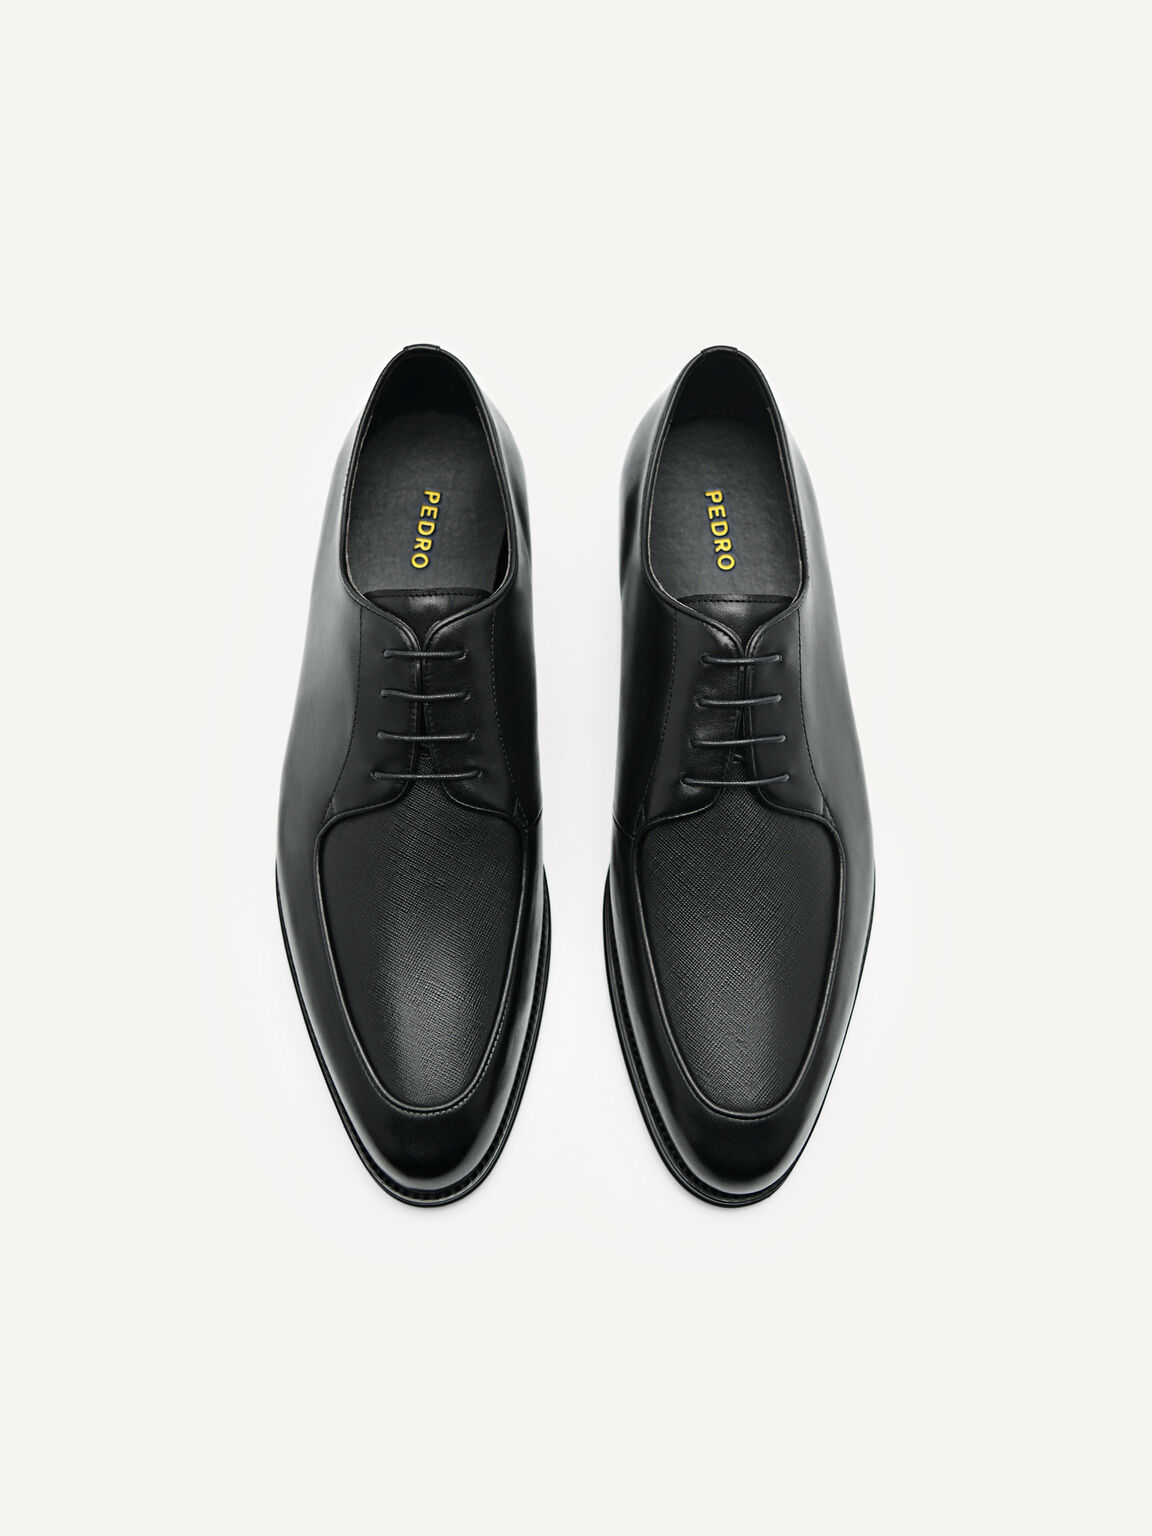 Leather Derby Shoes, Black